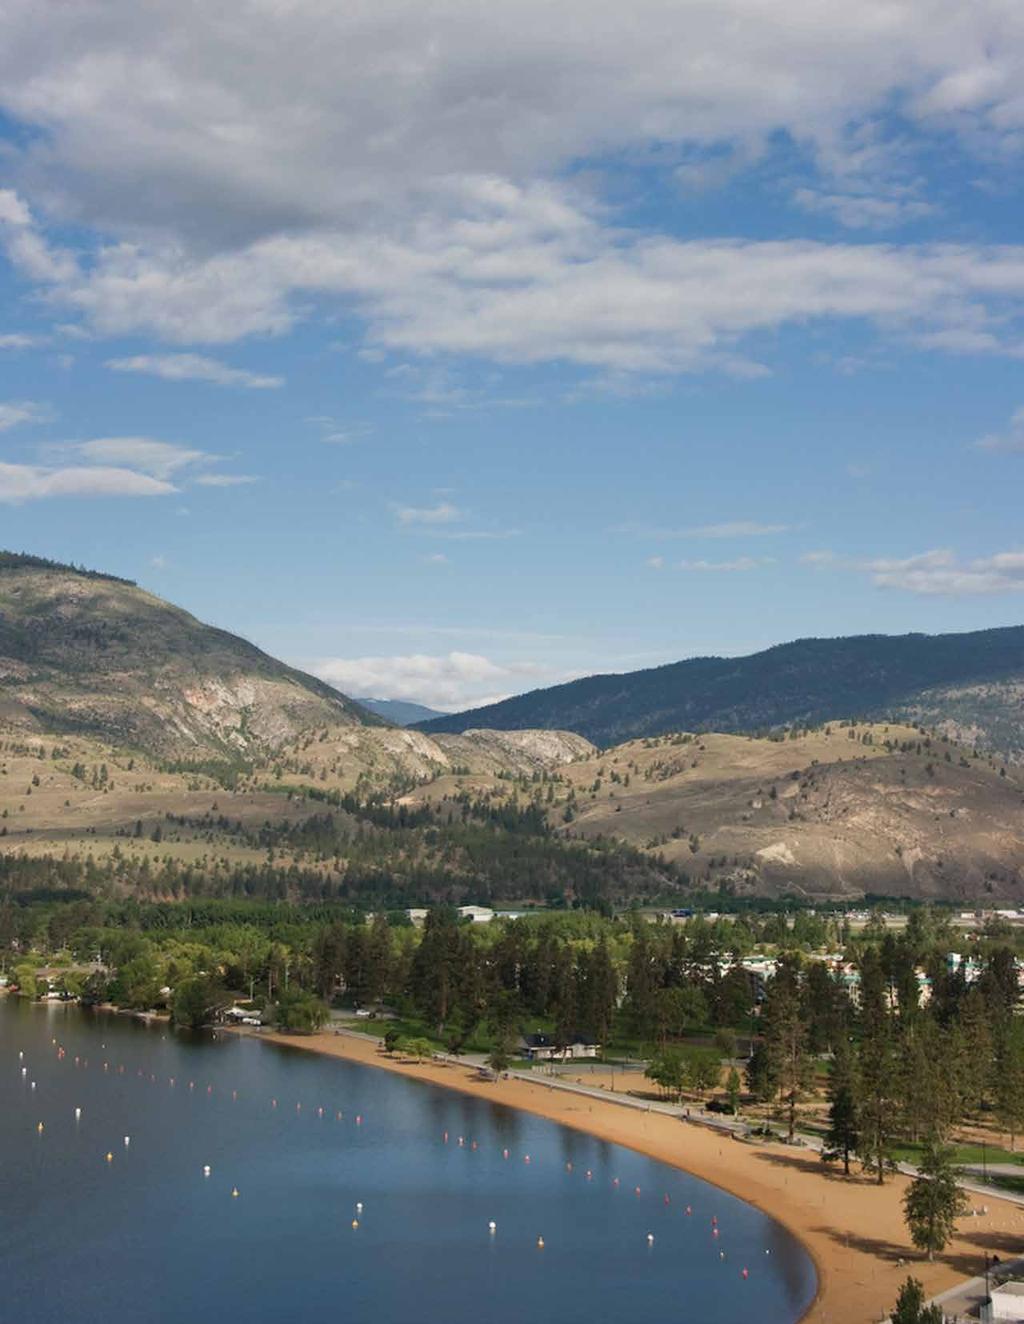 Learn more about making Penticton